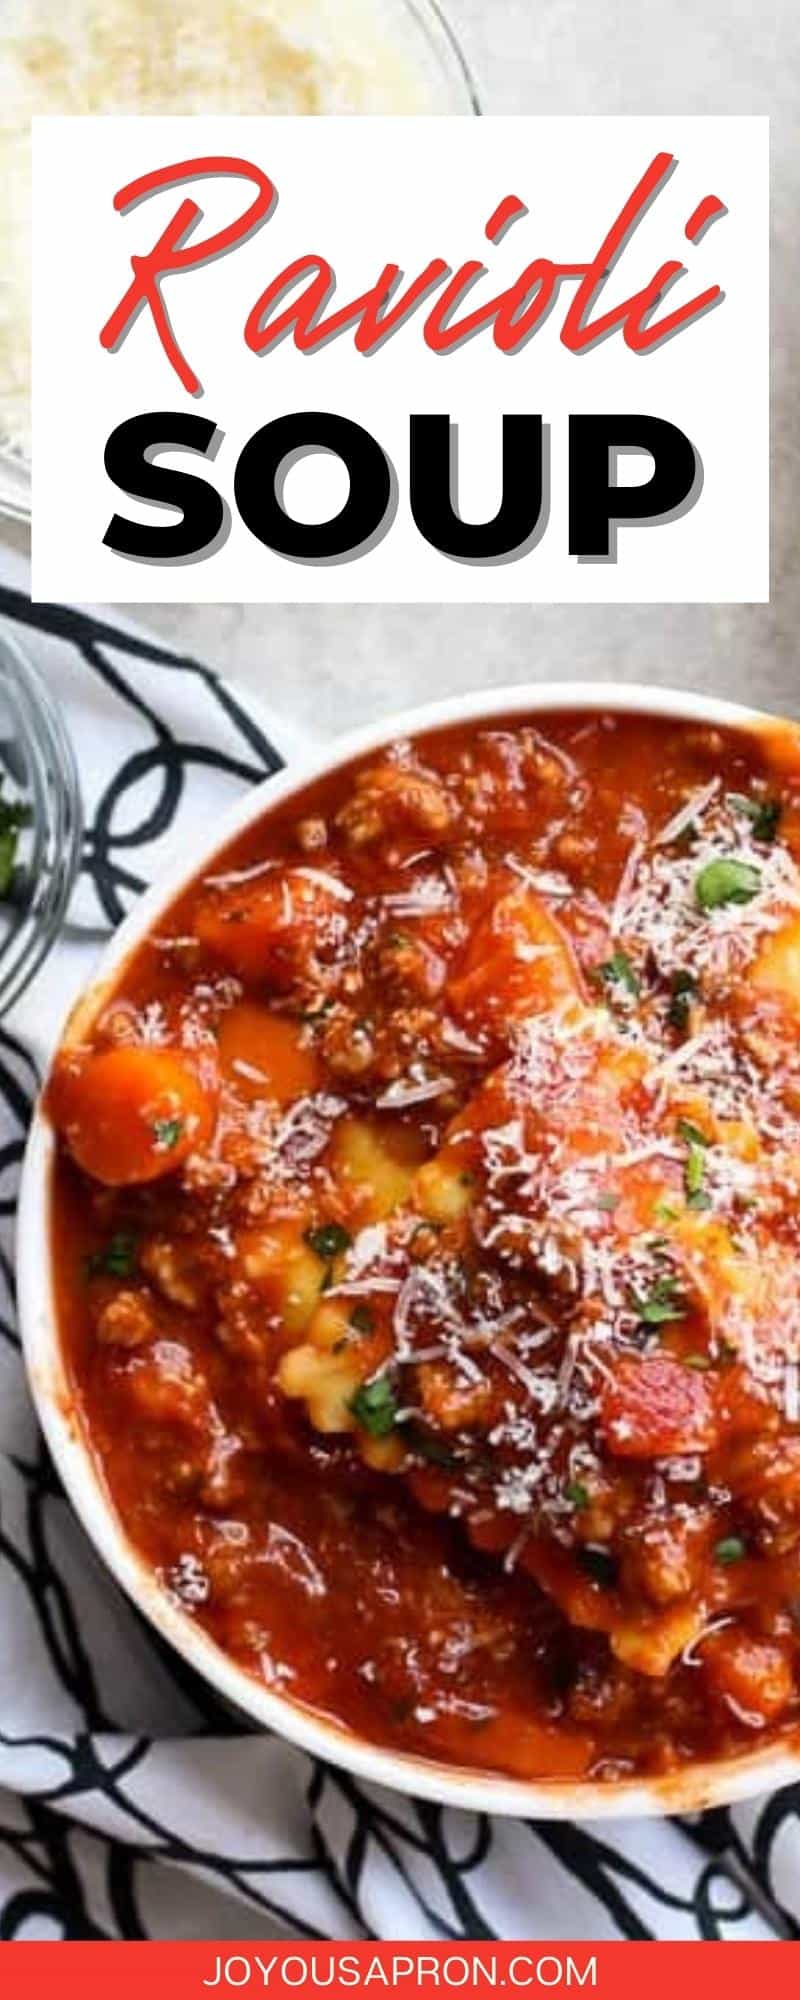 Ravioli Tomato Beef Soup - easy one pot meal comfort food soup recipe! A tomato and beef broth based soup filled with cheese ravioli, ground beef, carrots, and lot of herbs and spices. So flavorful and perfect for busy weeknights! via @joyousapron